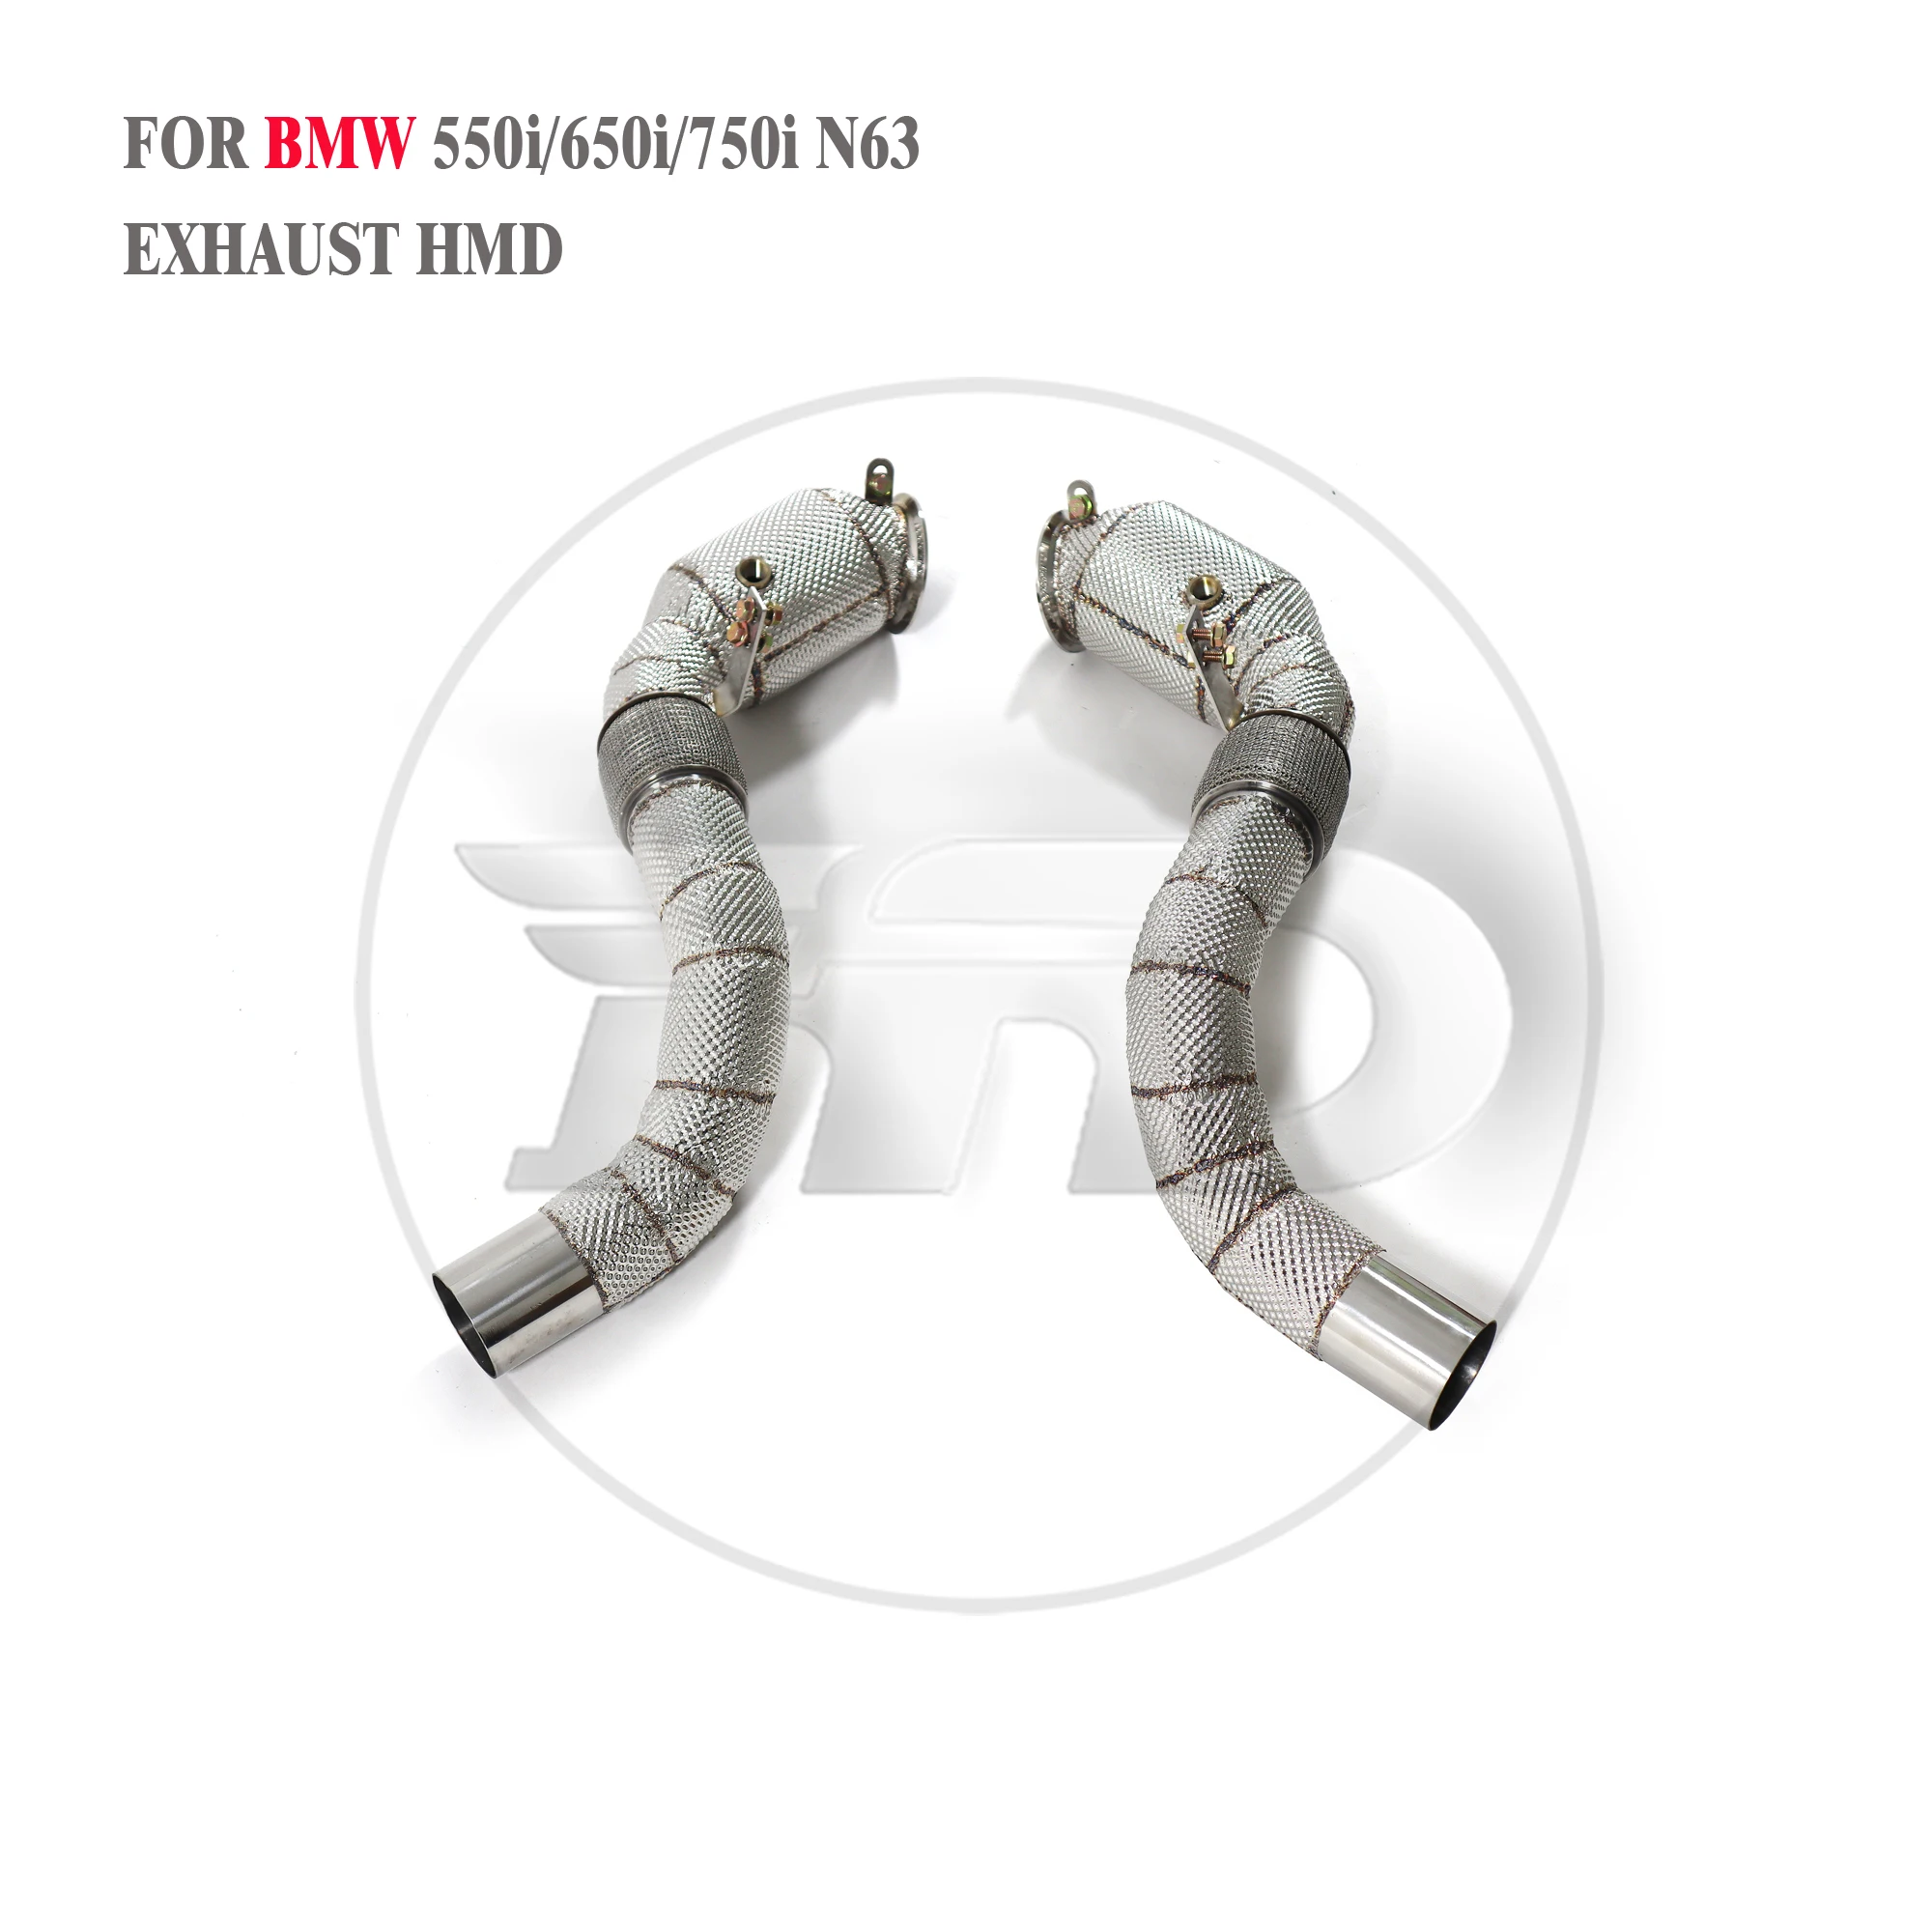 

HMD Exhaust System High Flow Performance Downpipe for BMW 550i 650i 750i F10 F06 F12 F13 F02 4.4T N63 Engine